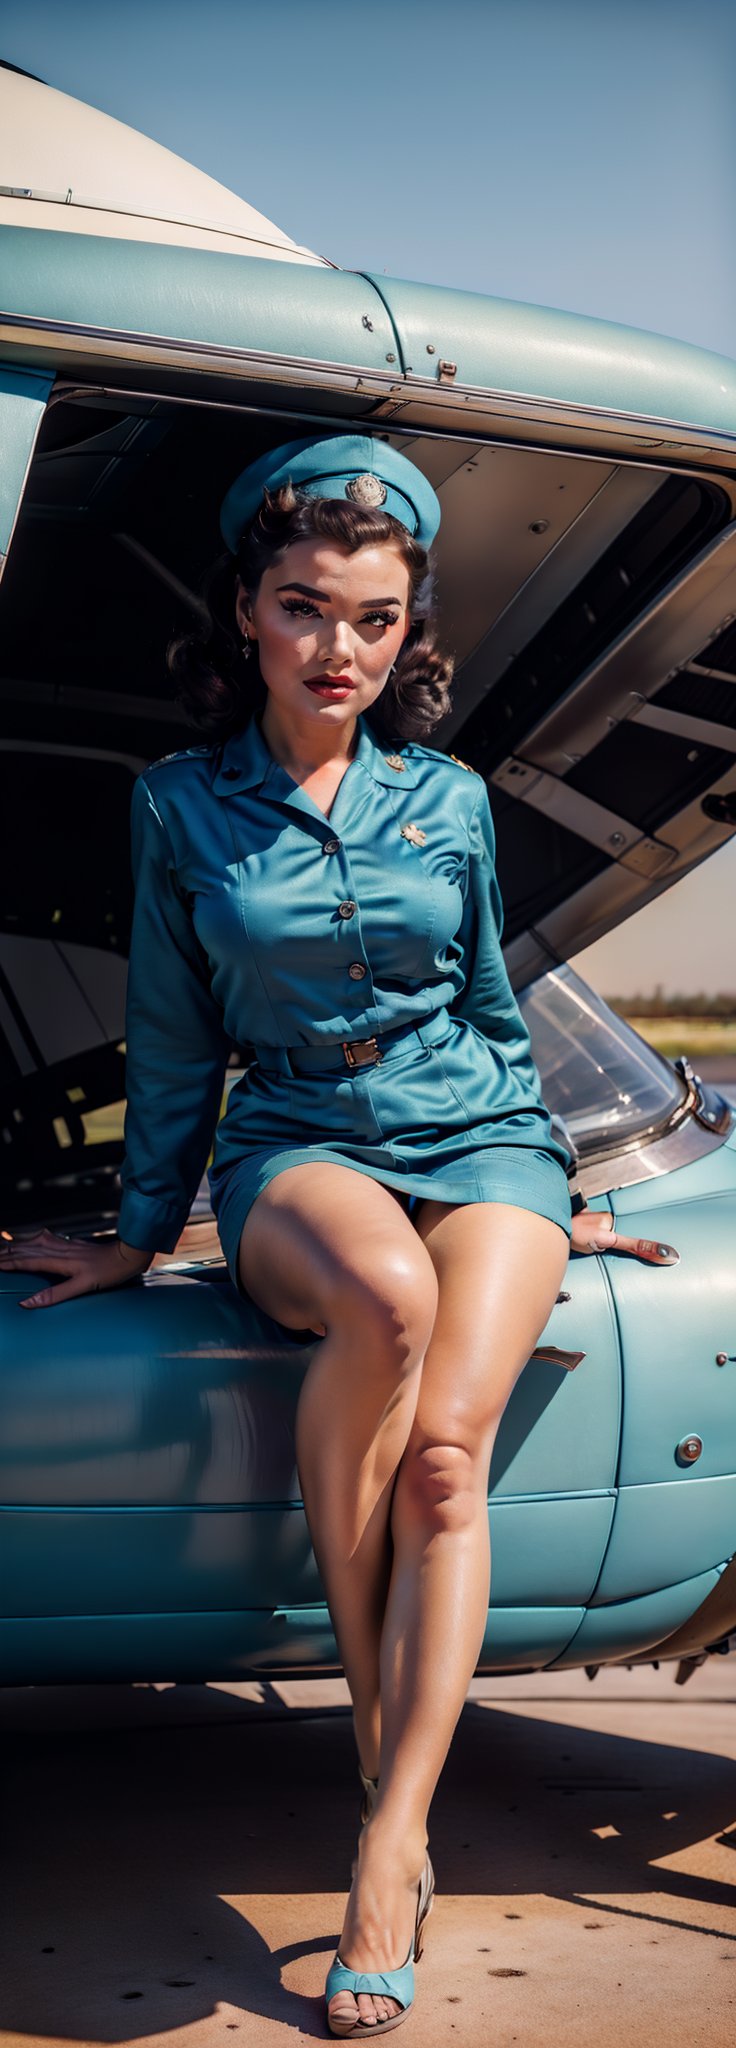 Exquisite facial features radiate from the perfect face of a stunning 1-girl solo Pin-Up. Set against a brilliant blue sky with puffy clouds, she sits barefoot in her (((military uniform))), complete with hat and skirt, as if emerging from an aircraft. A sailor's cover adorns the back of her uniform, while a pilot's cap rests on her knee. The propeller of the airplane spins softly in the background, drawing focus to this masterpiece of digital artistry, rendered in exquisite detail for an 8K wallpaper.